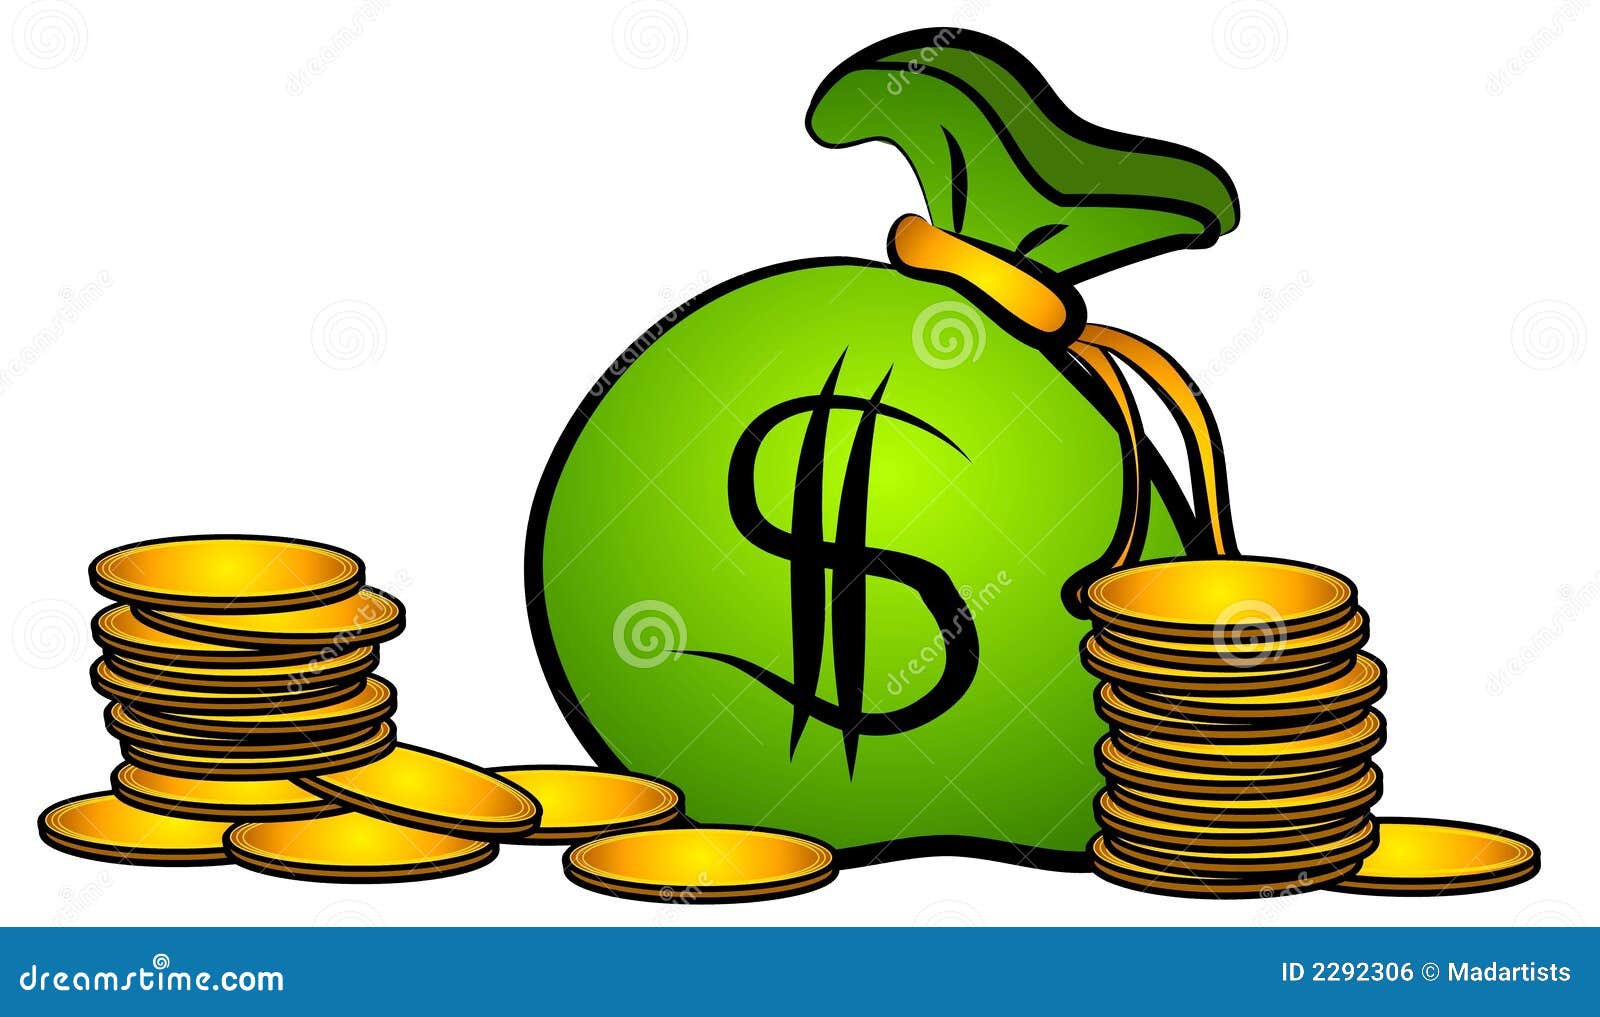 clipart money bags free - photo #28